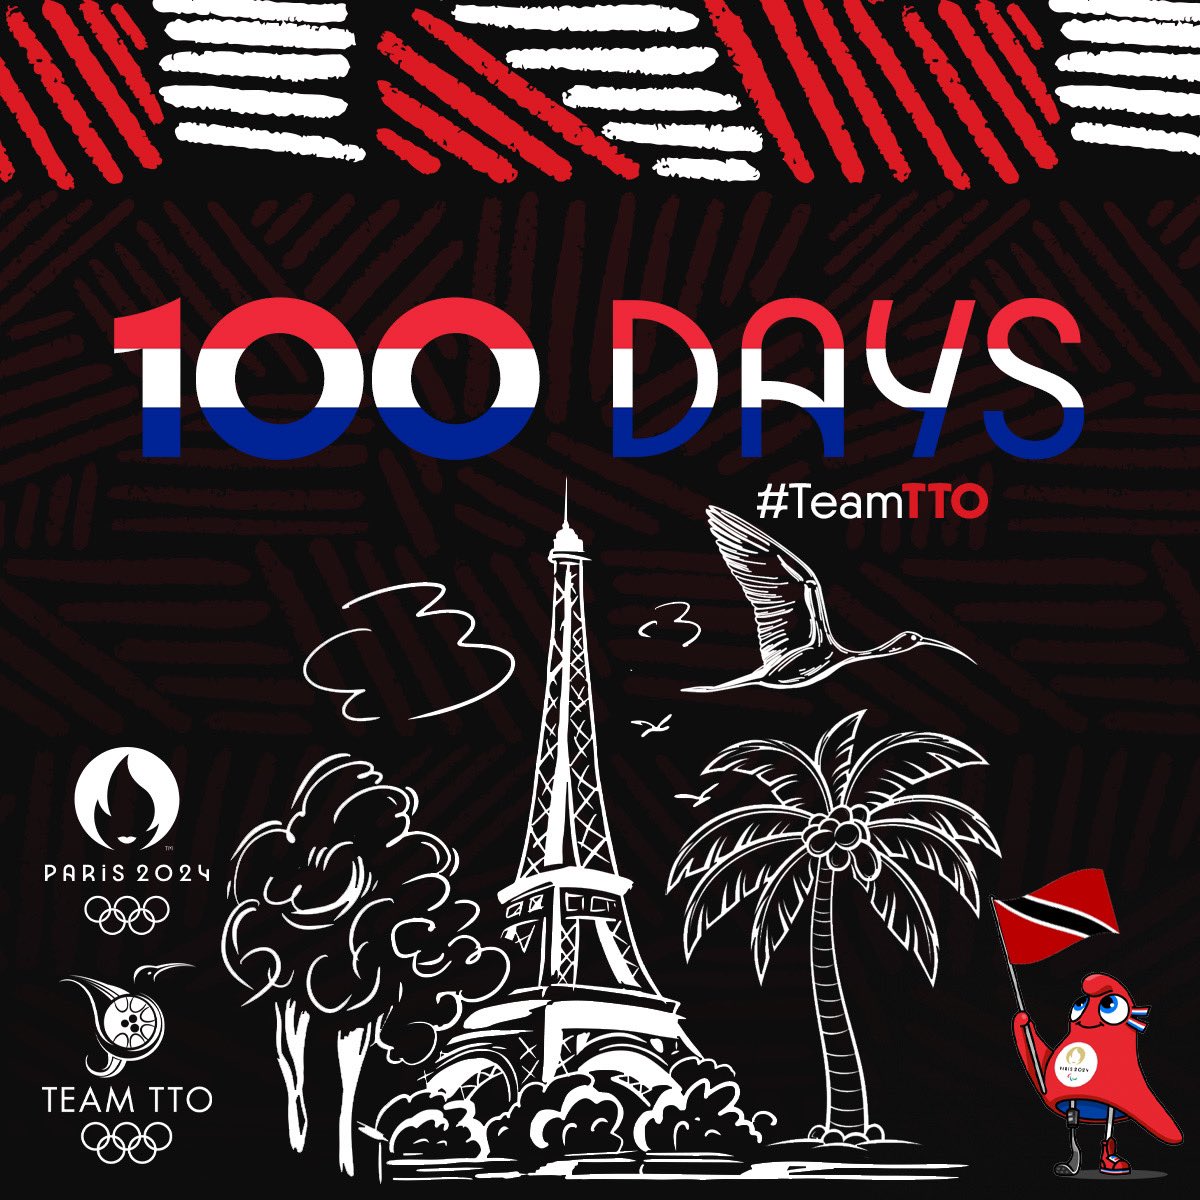 A century of anticipation, 💯 days of preparation💪🏾 #Paris2024 🇫🇷 marks the return of the ✨Olympics to France after a hundred years! Our athletes are getting ready to make TTO proud on the 🌎 stage. LETS GO TTO 🇹🇹🇹🇹🇹🇹🇹🇹 Let the countdown to Paris begin! #TeamTTO #RoadToParis